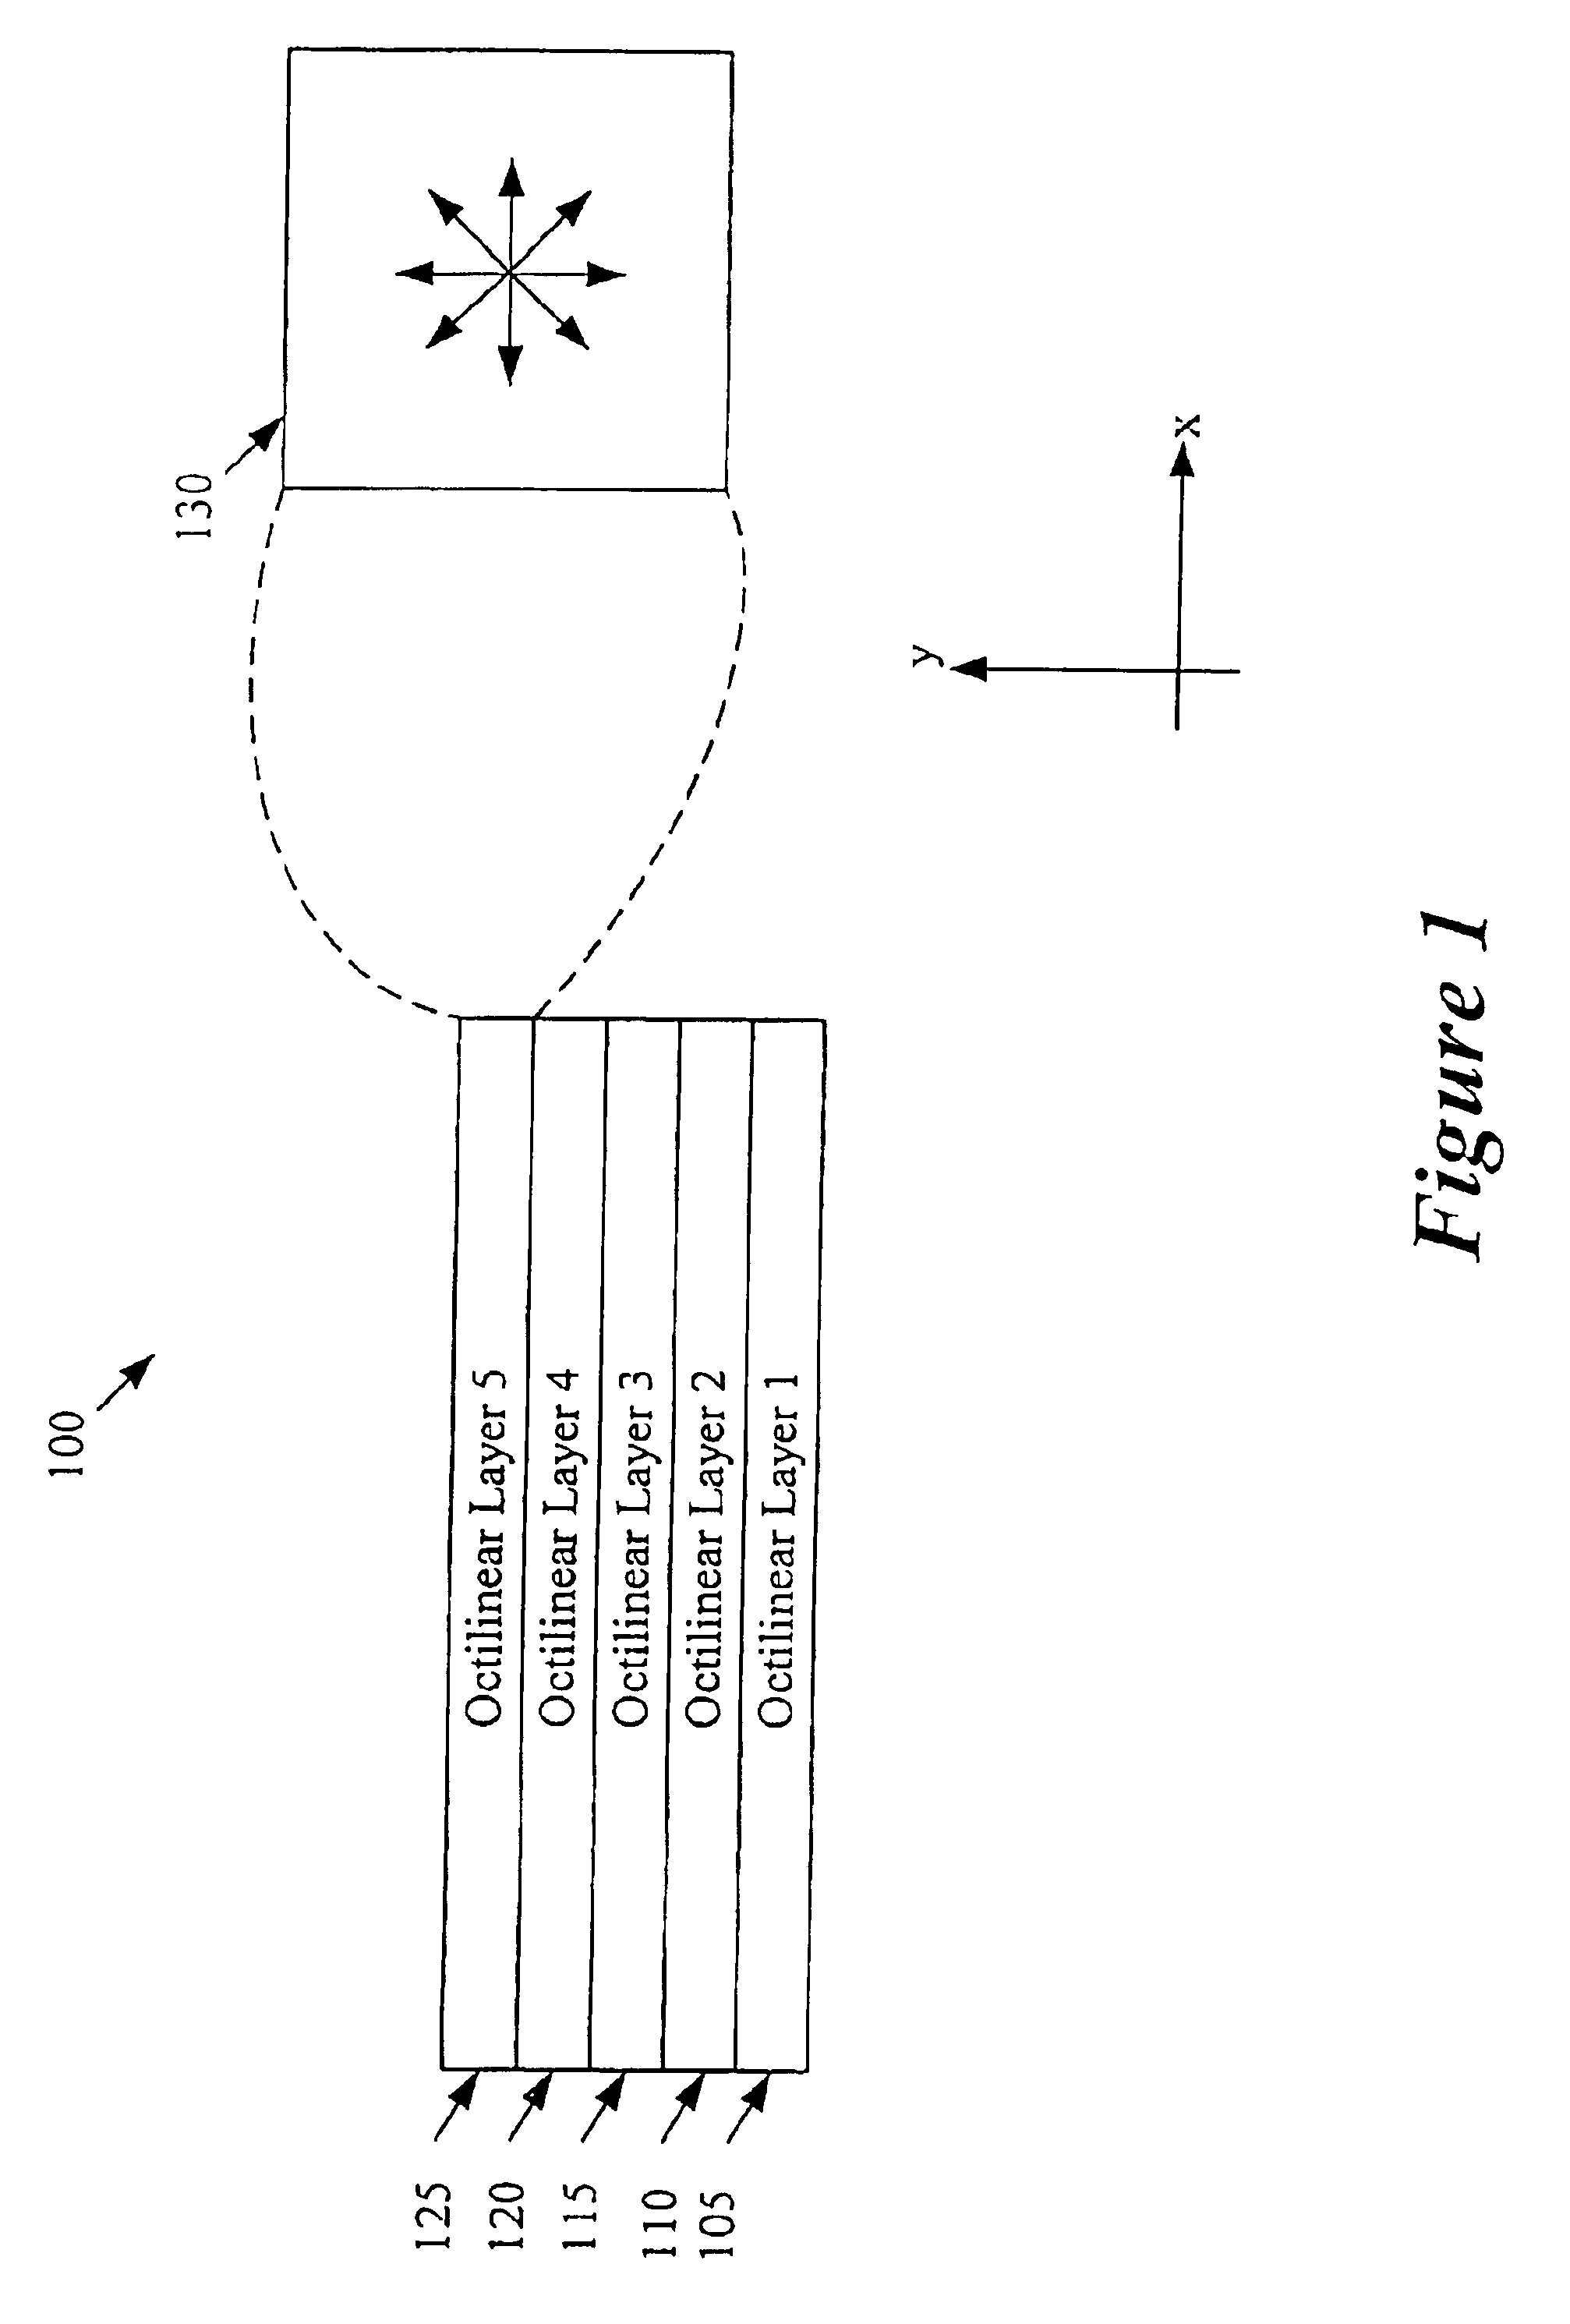 Method and apparatus for routing a set of nets